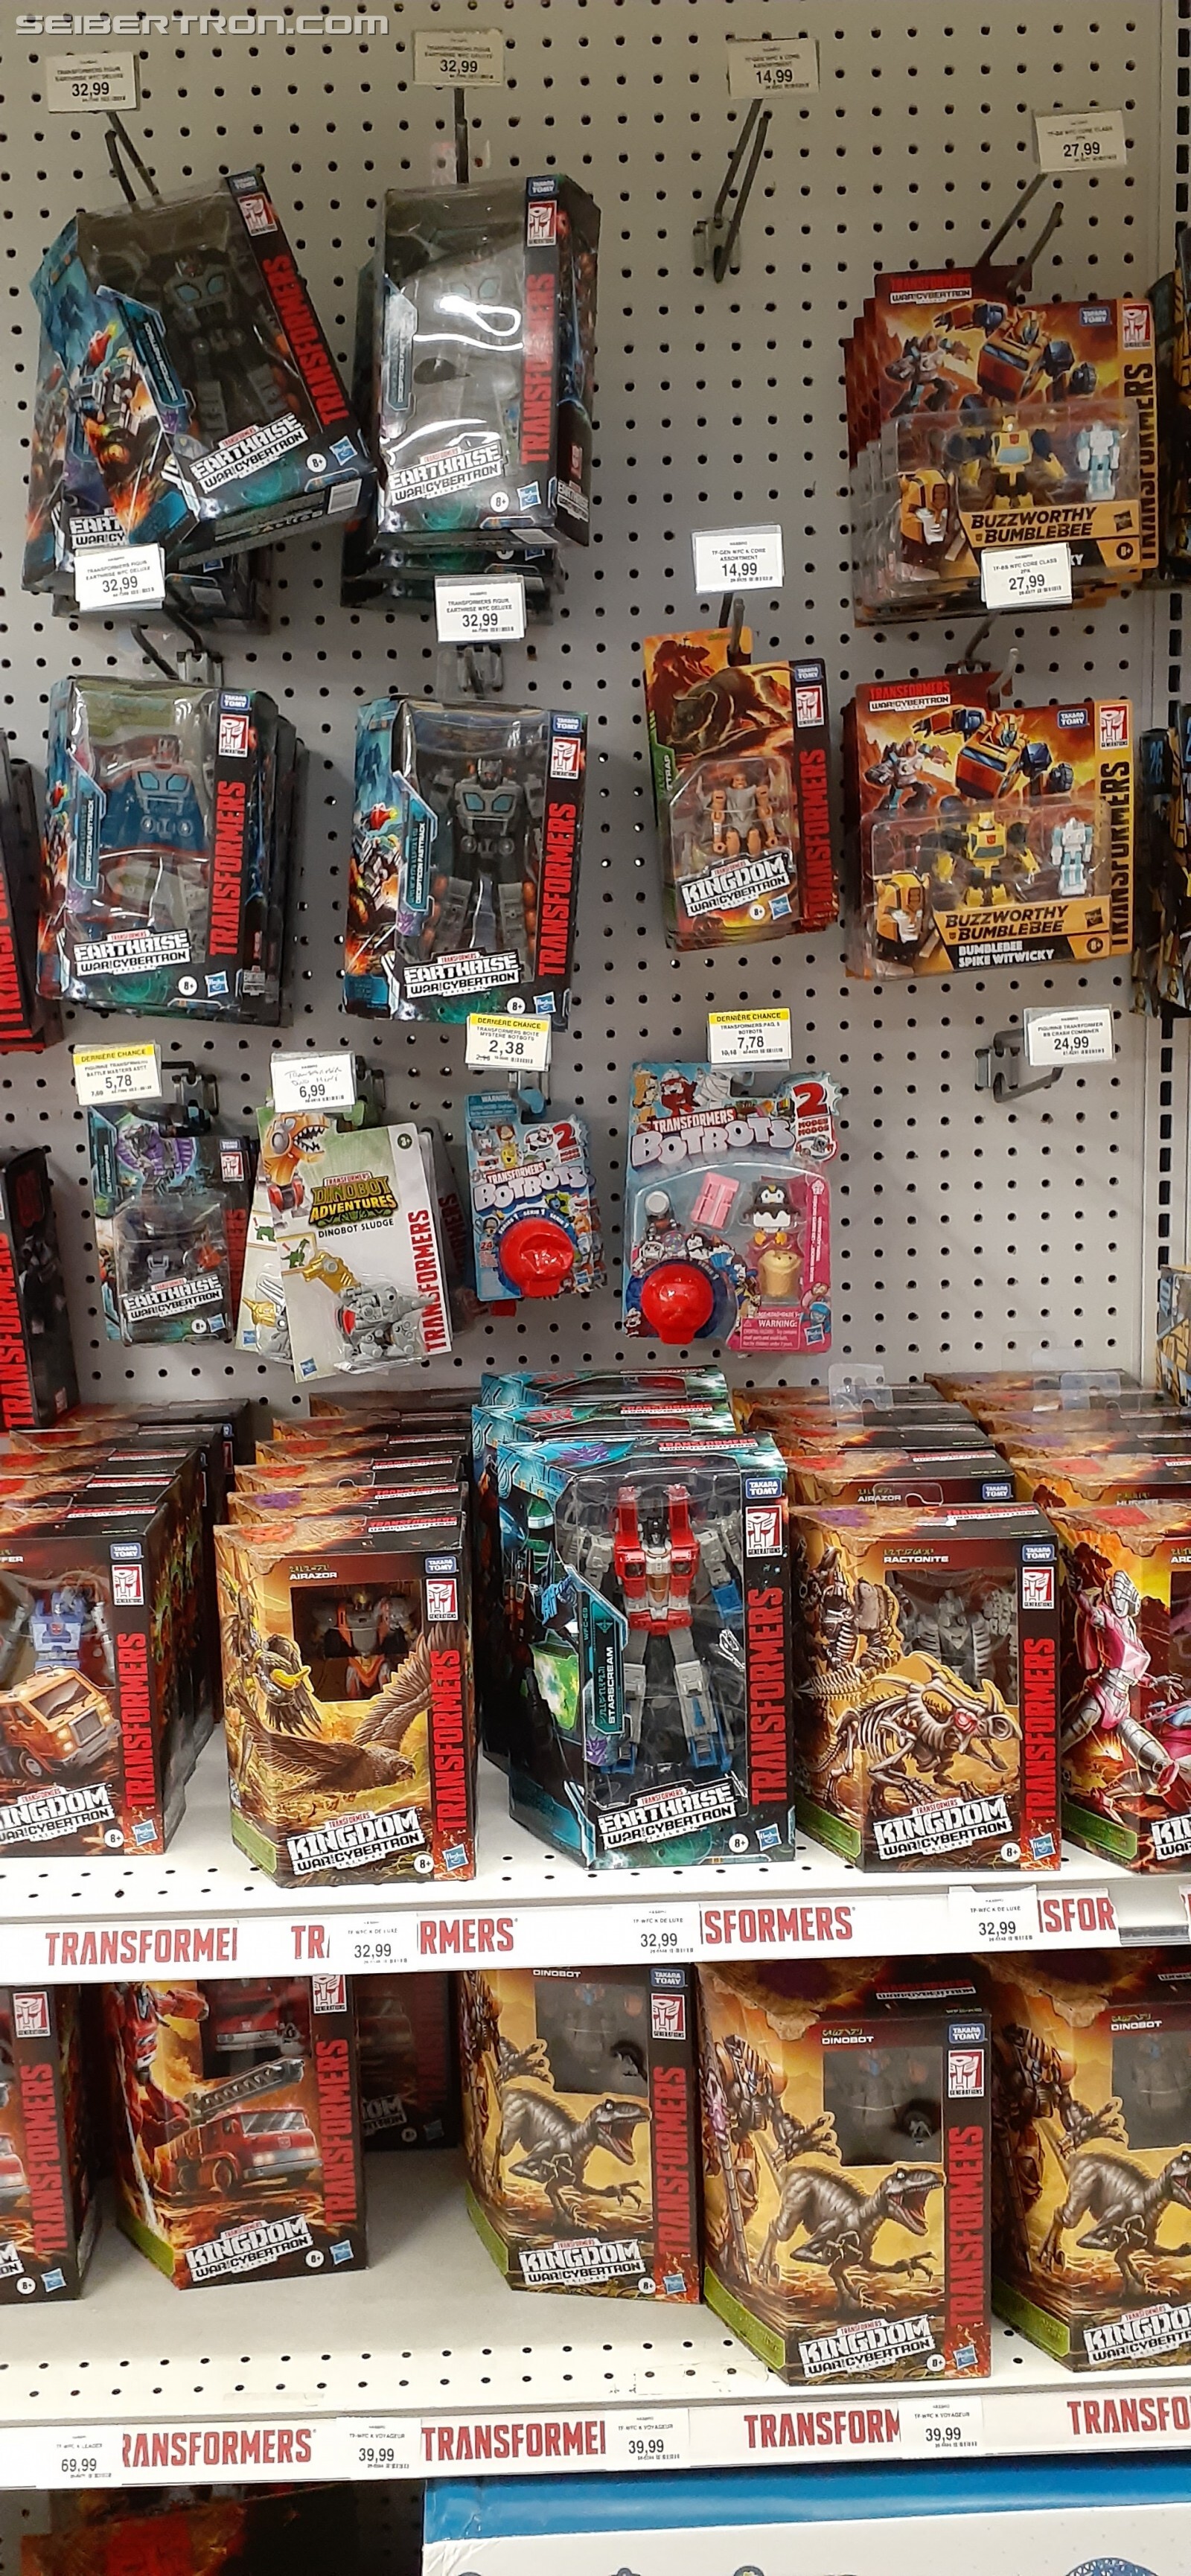 Transformers News: Transformers Rescue Bots G1 Dinobots Redecos Found at Toysrus Canada